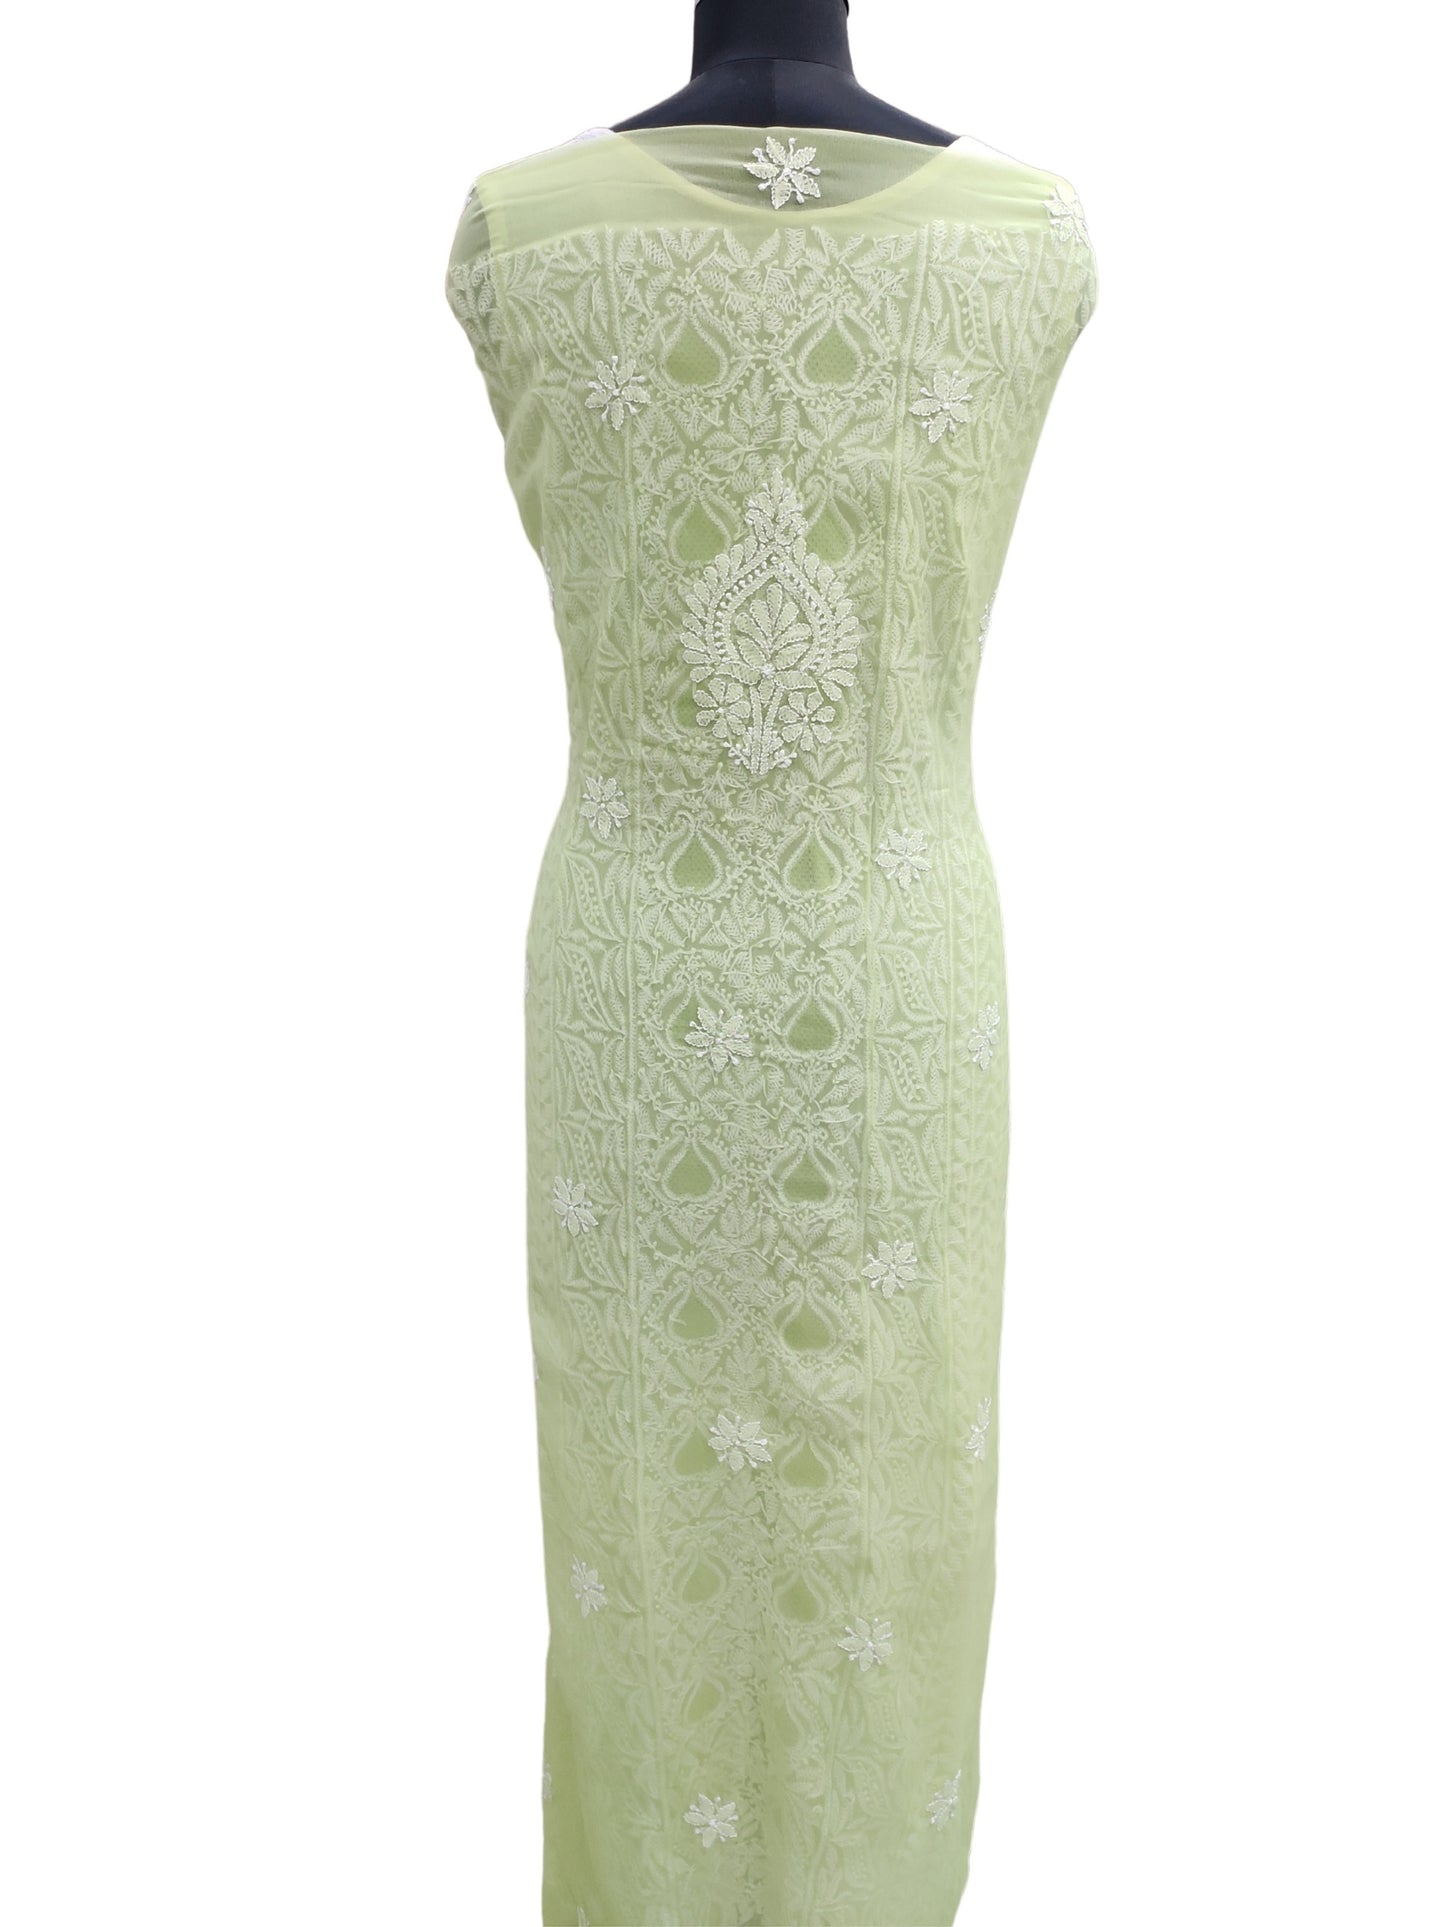 Shyamal Chikan Hand Embroidered Mint Green Georgette Lucknowi Chikankari Unstitched Suit Piece With Jaali Work - S10702